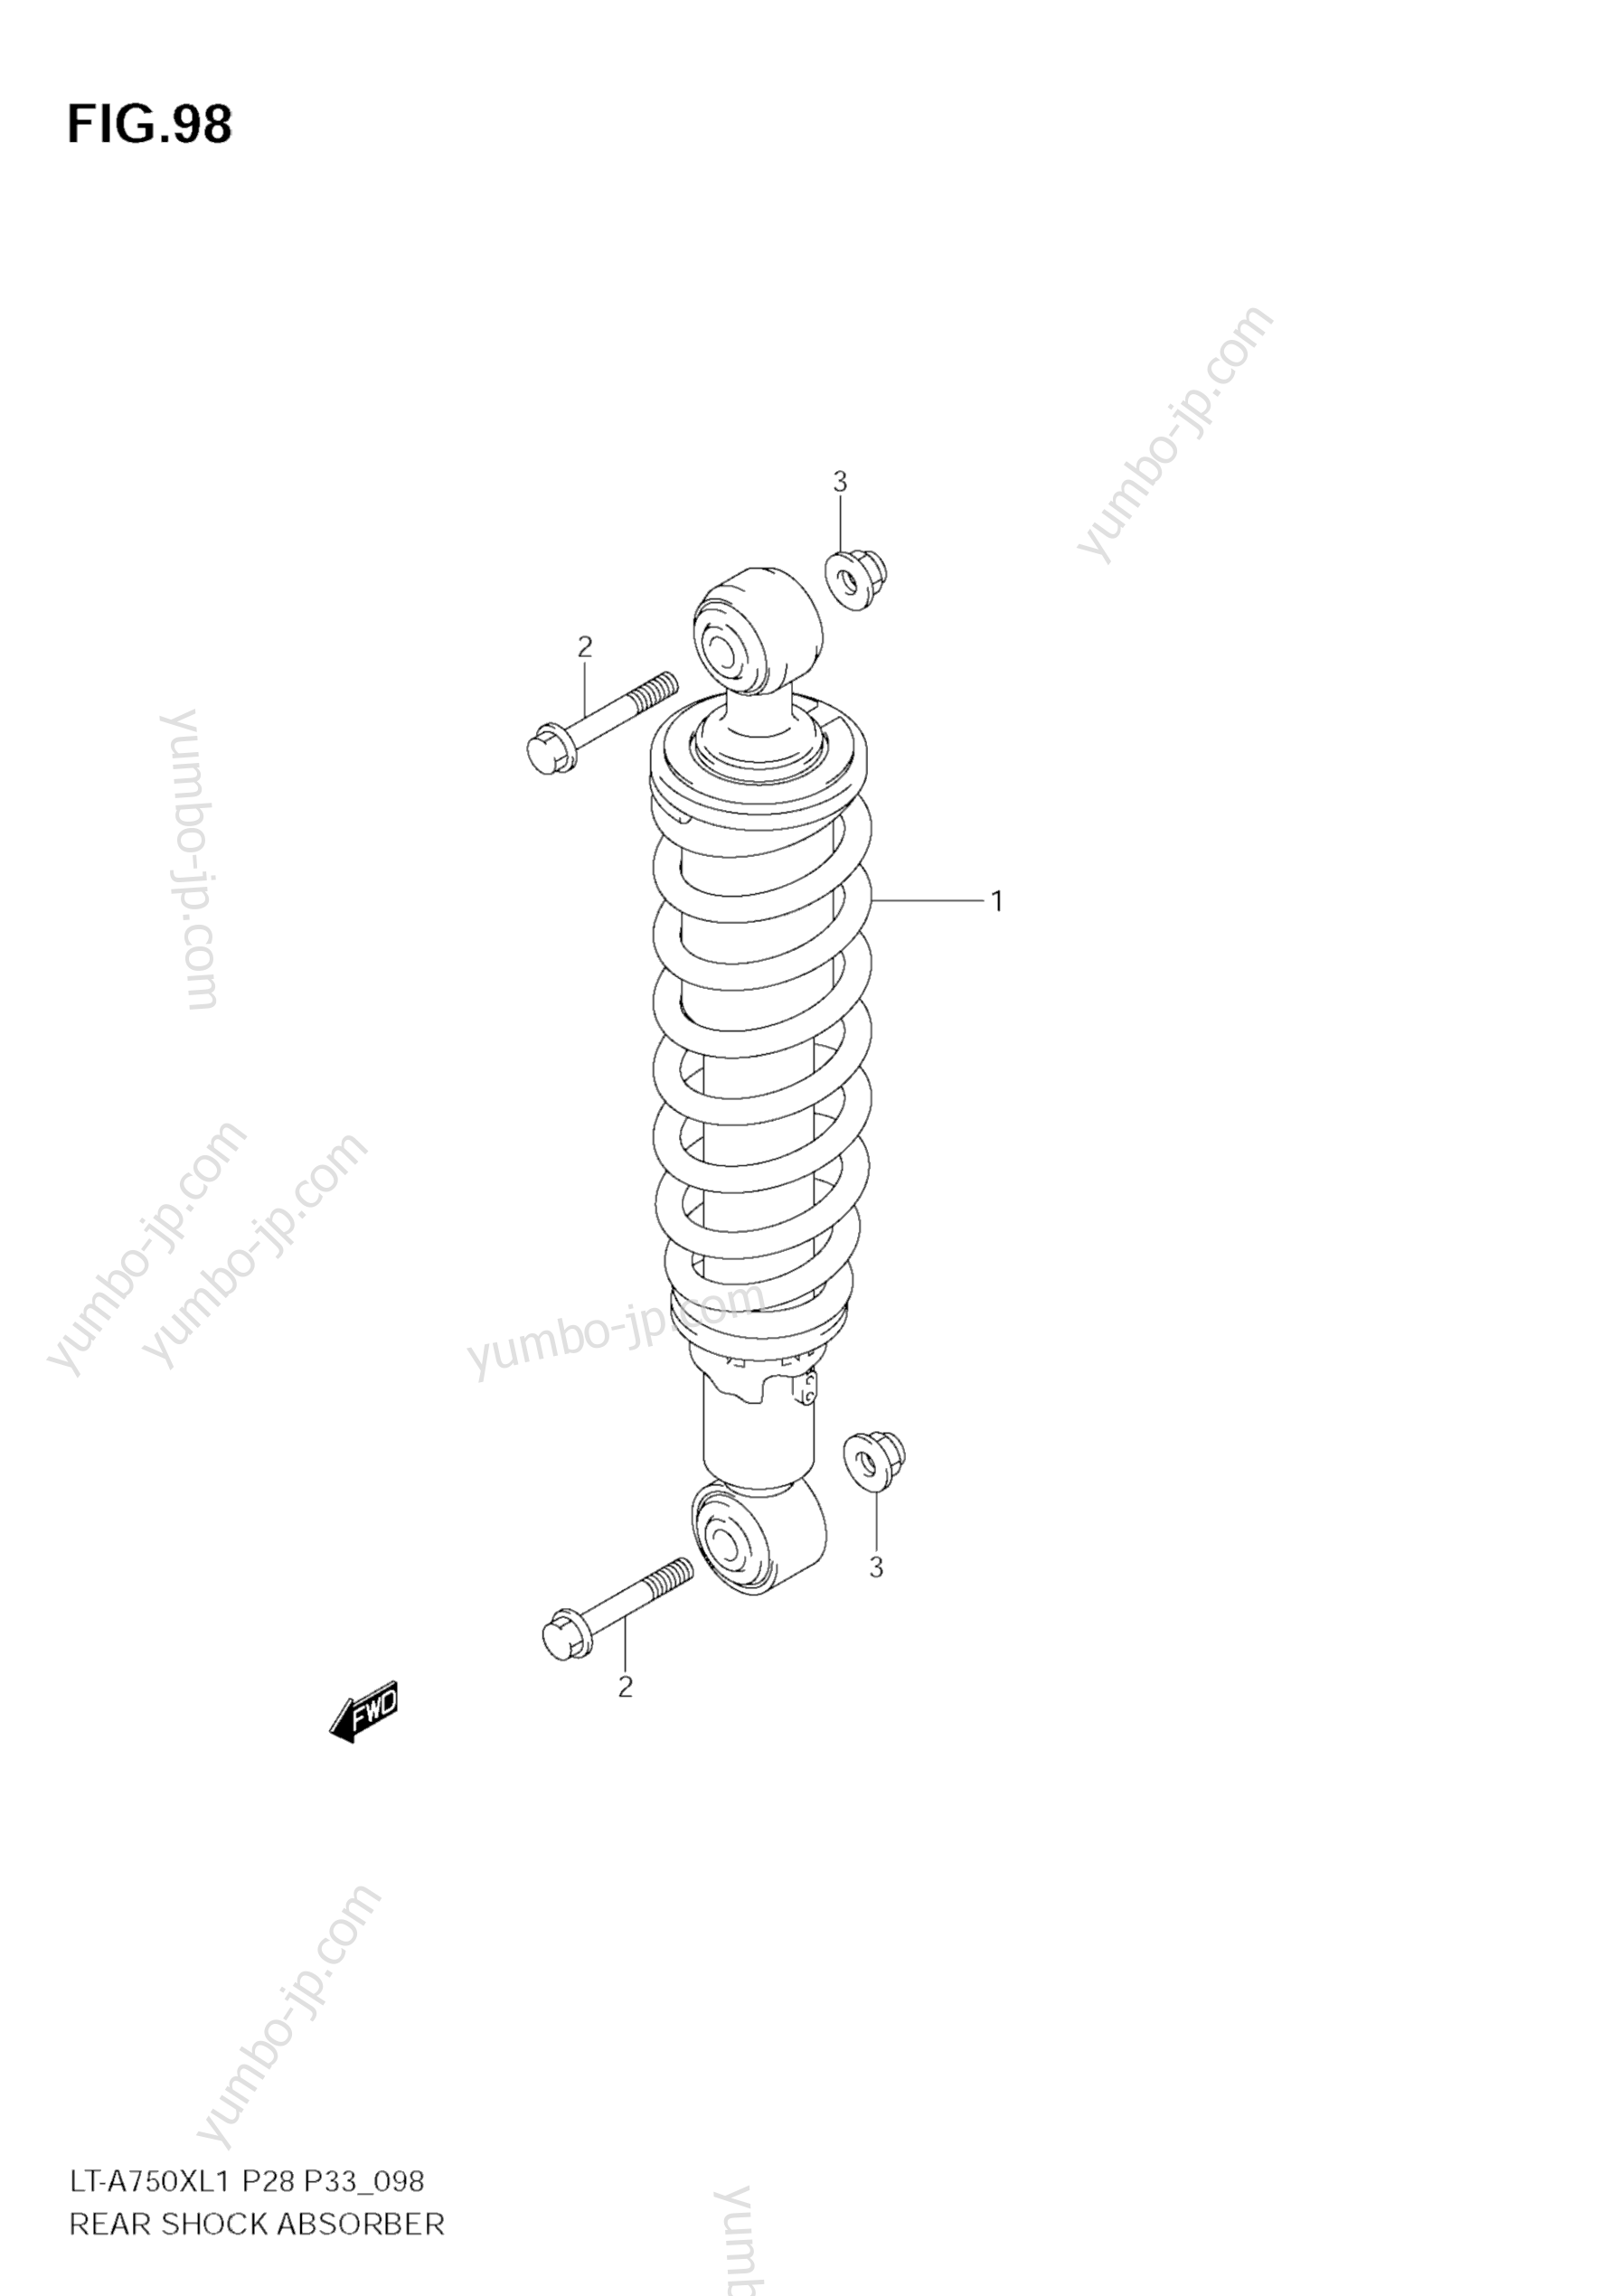 REAR SHOCK ABSORBER for ATVs SUZUKI KingQuad (LT-A750XZ) 2011 year